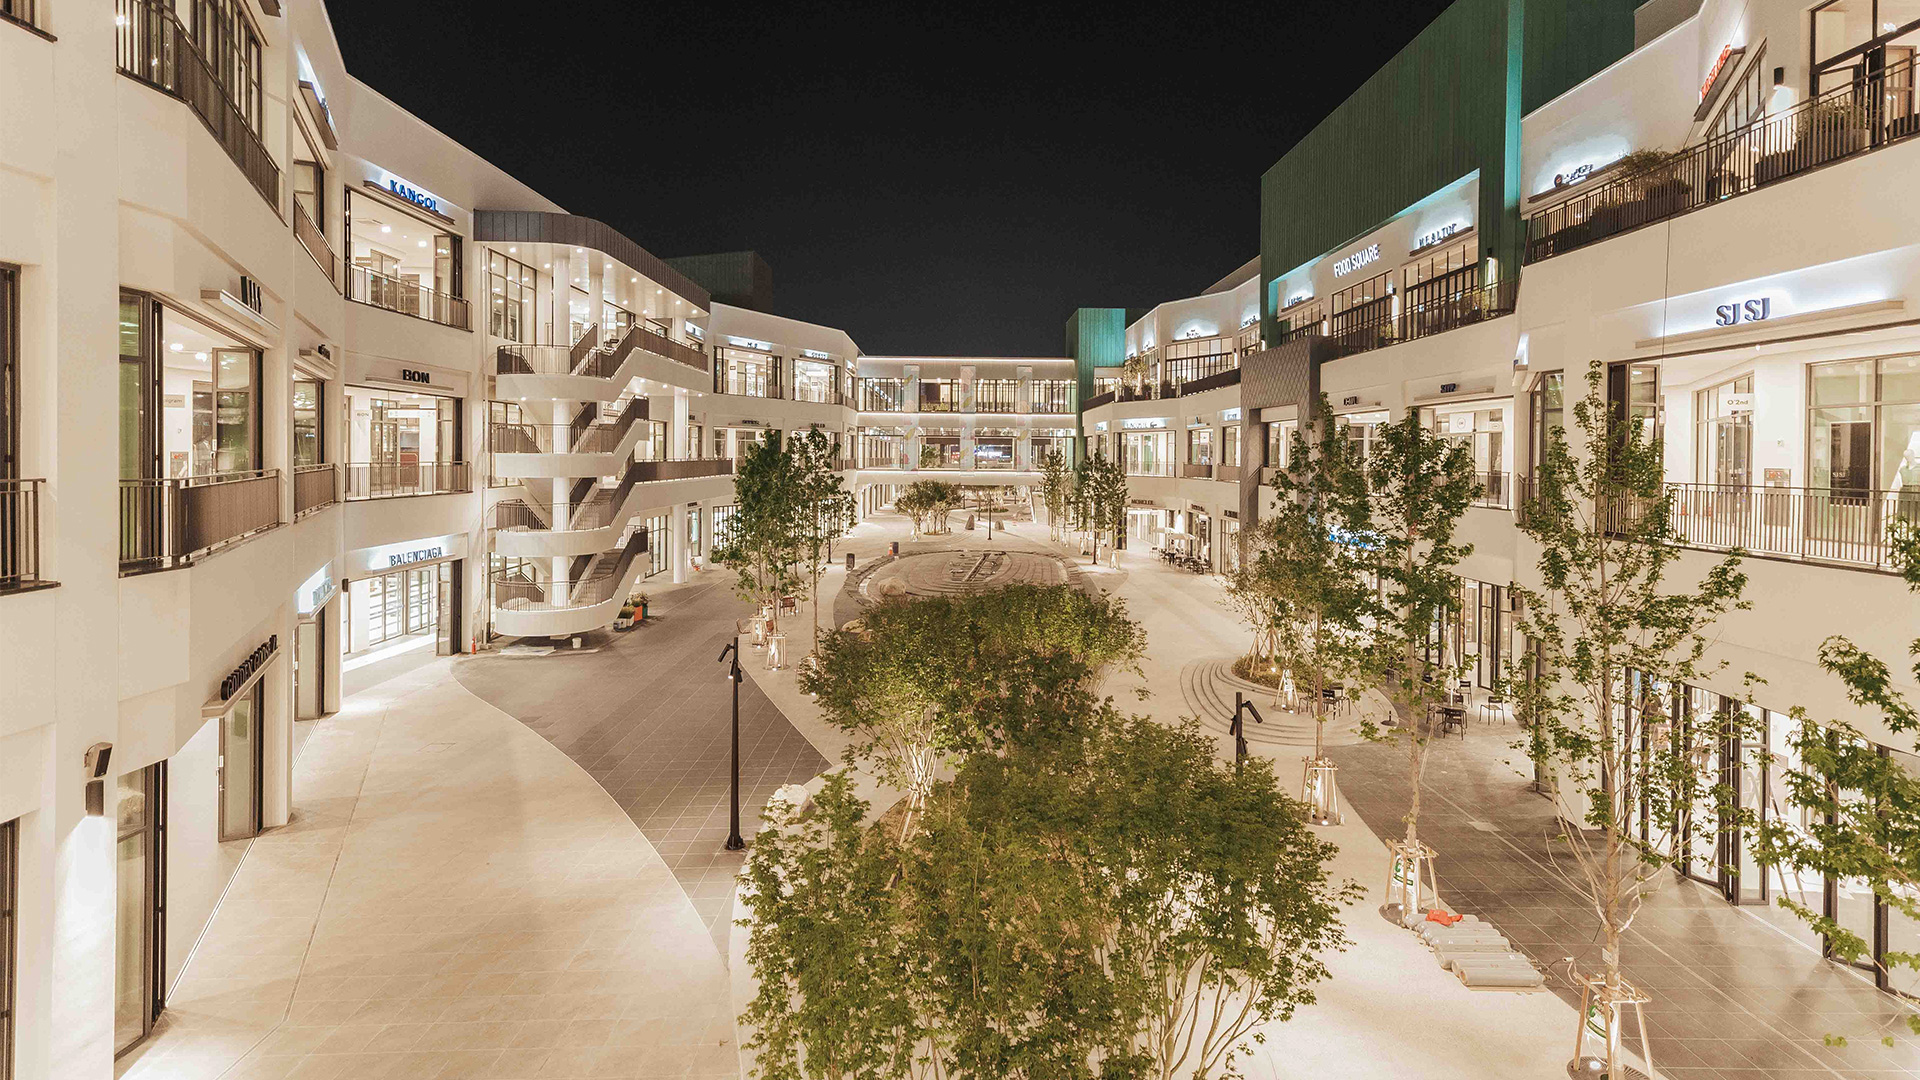 Daejeon Hyundai Premium Outlet with rooftop garden and hydroponic facilities